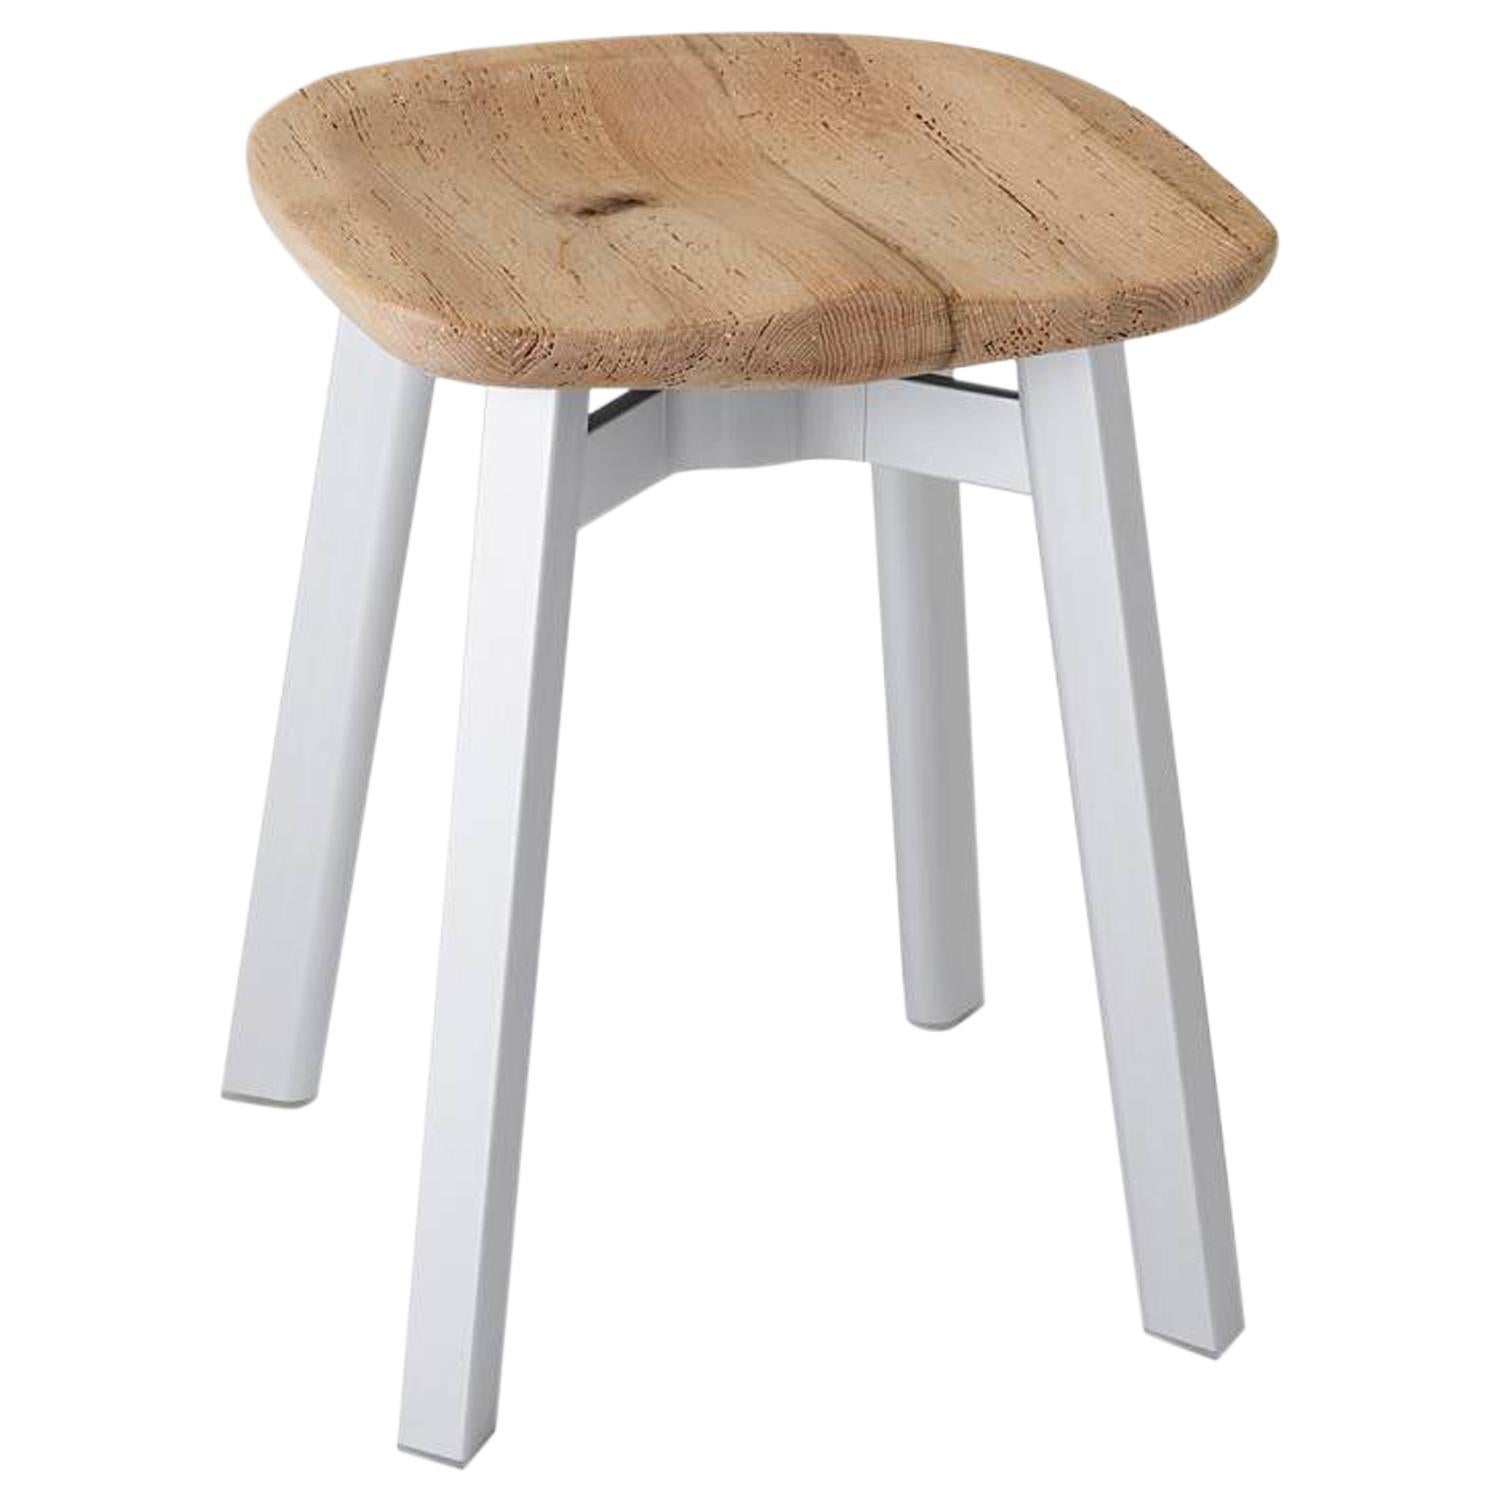 Emeco Su Small Stool in Natural Aluminum w/ Reclaimed Oak Seat by Nendo